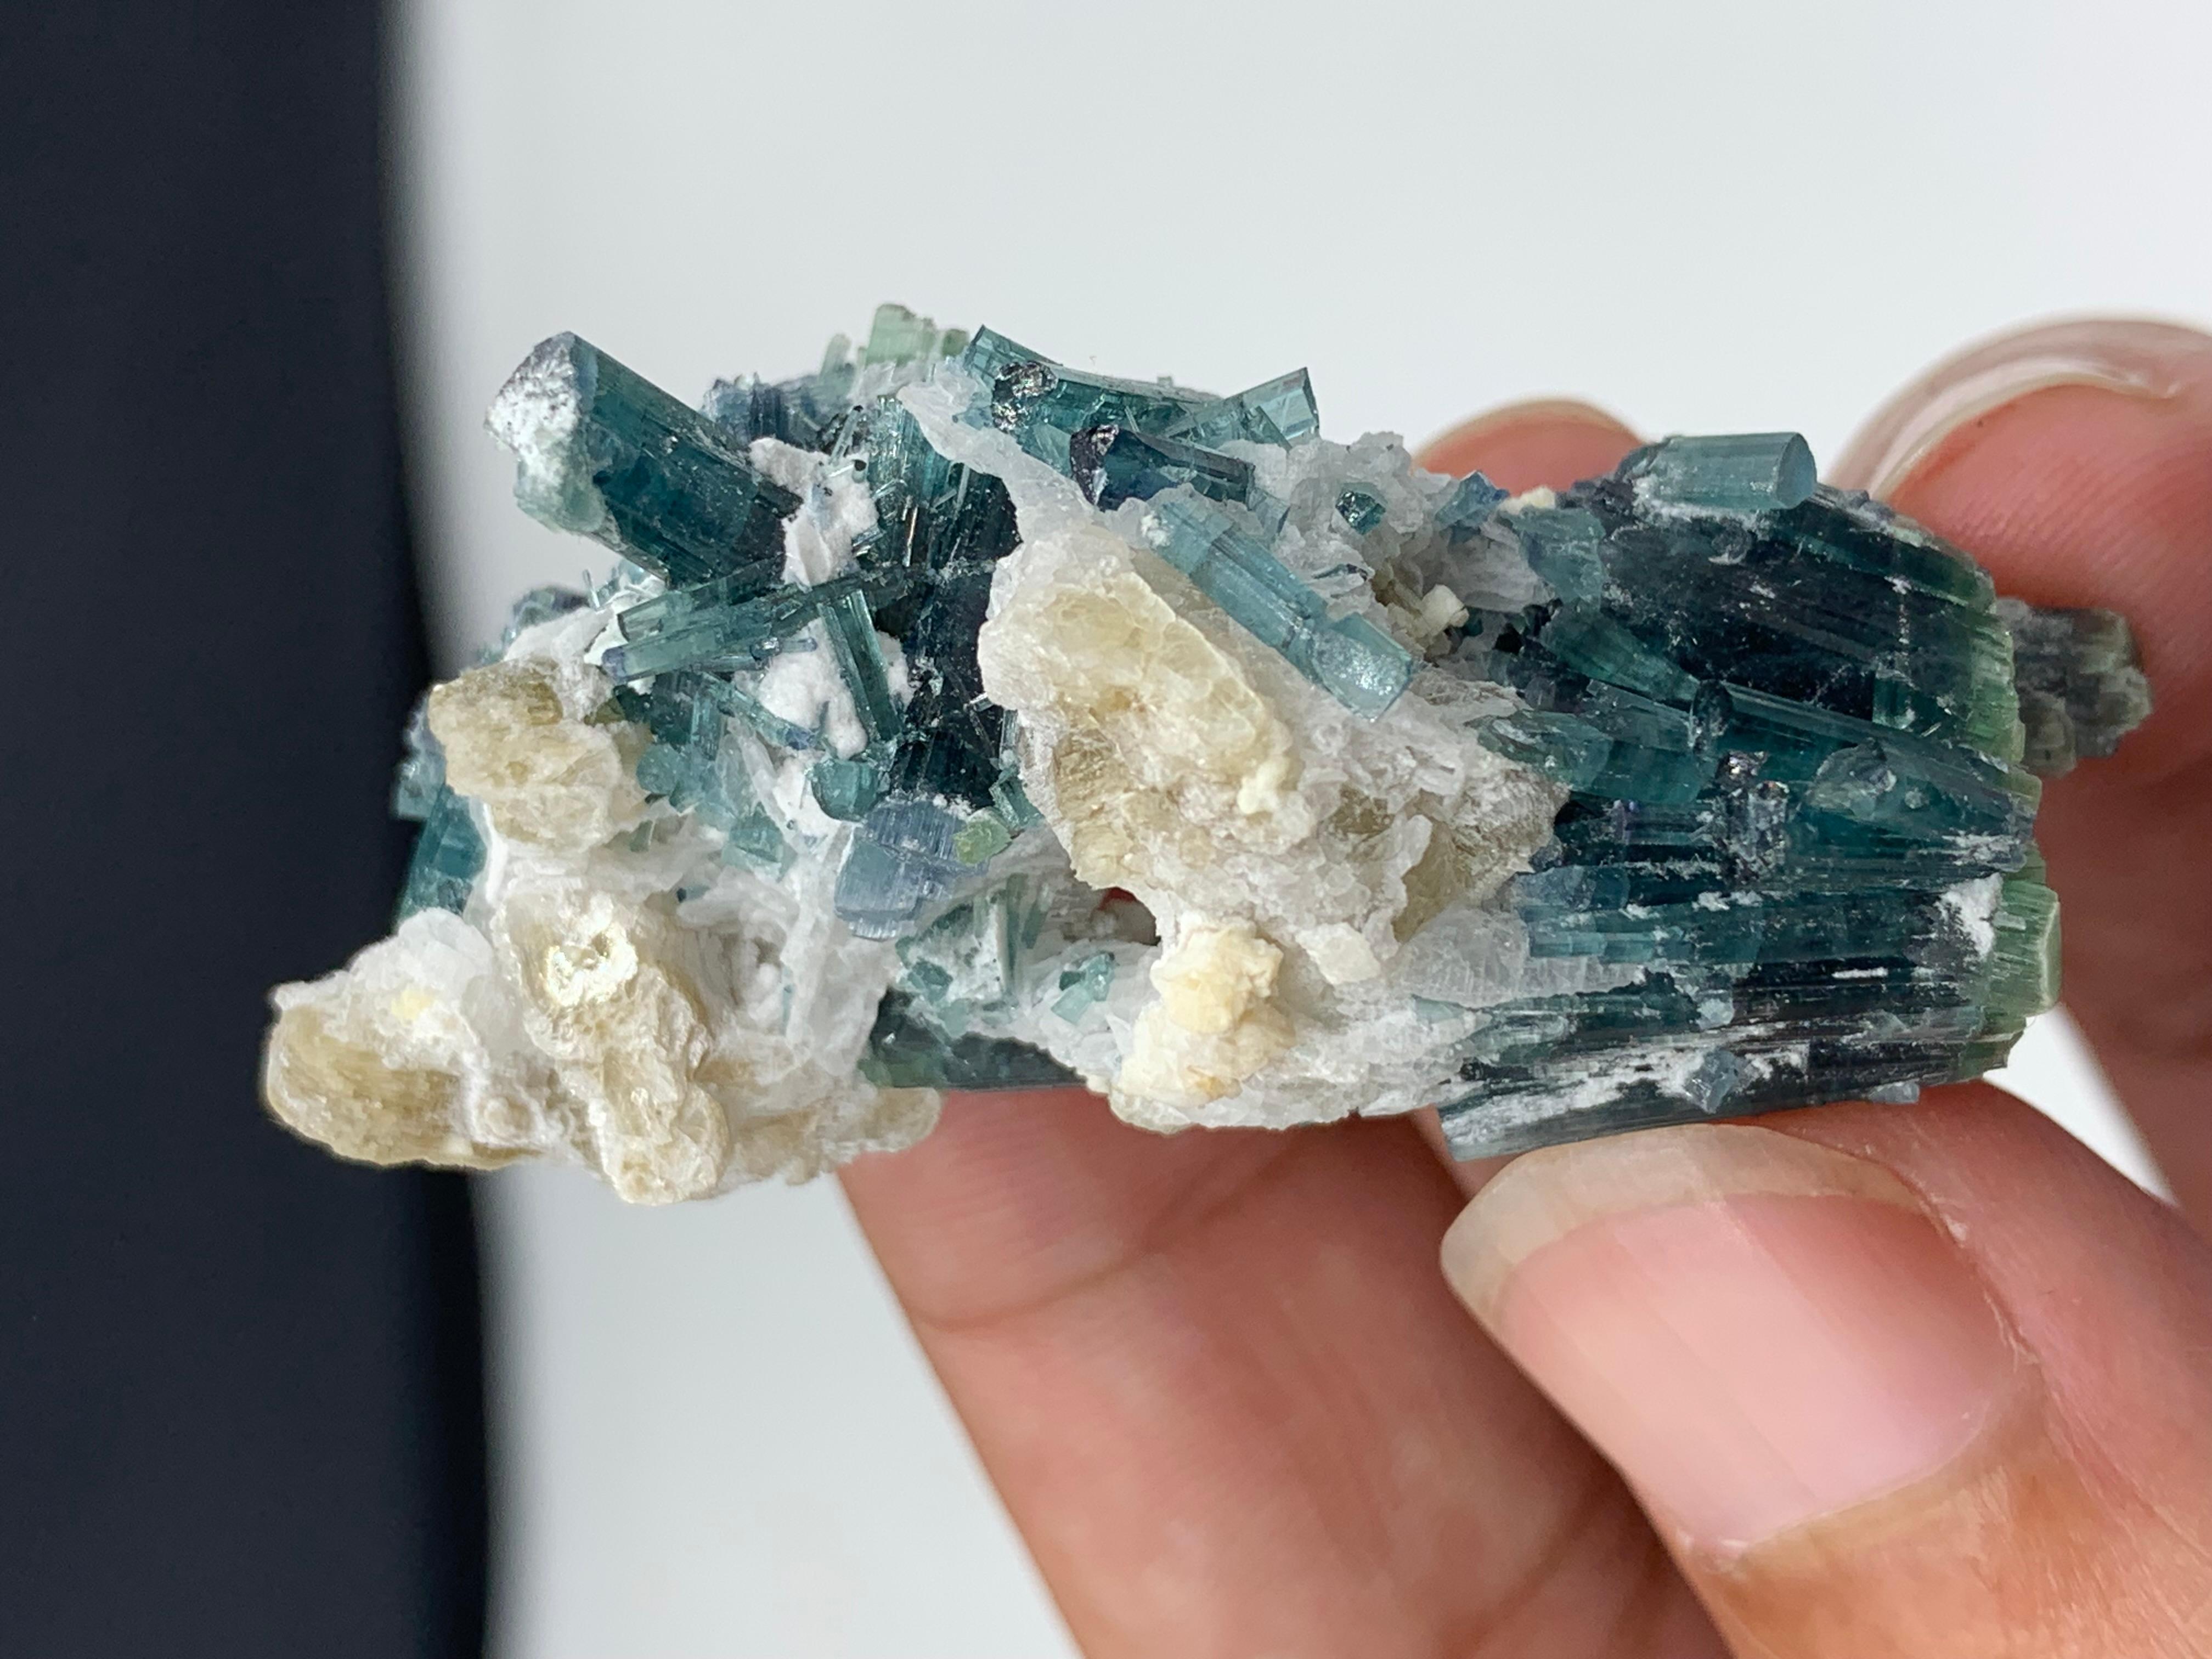 Rock Crystal 20.81 Gram Indicolite Blue Tourmaline Crystal With Albite From Afghanistan  For Sale